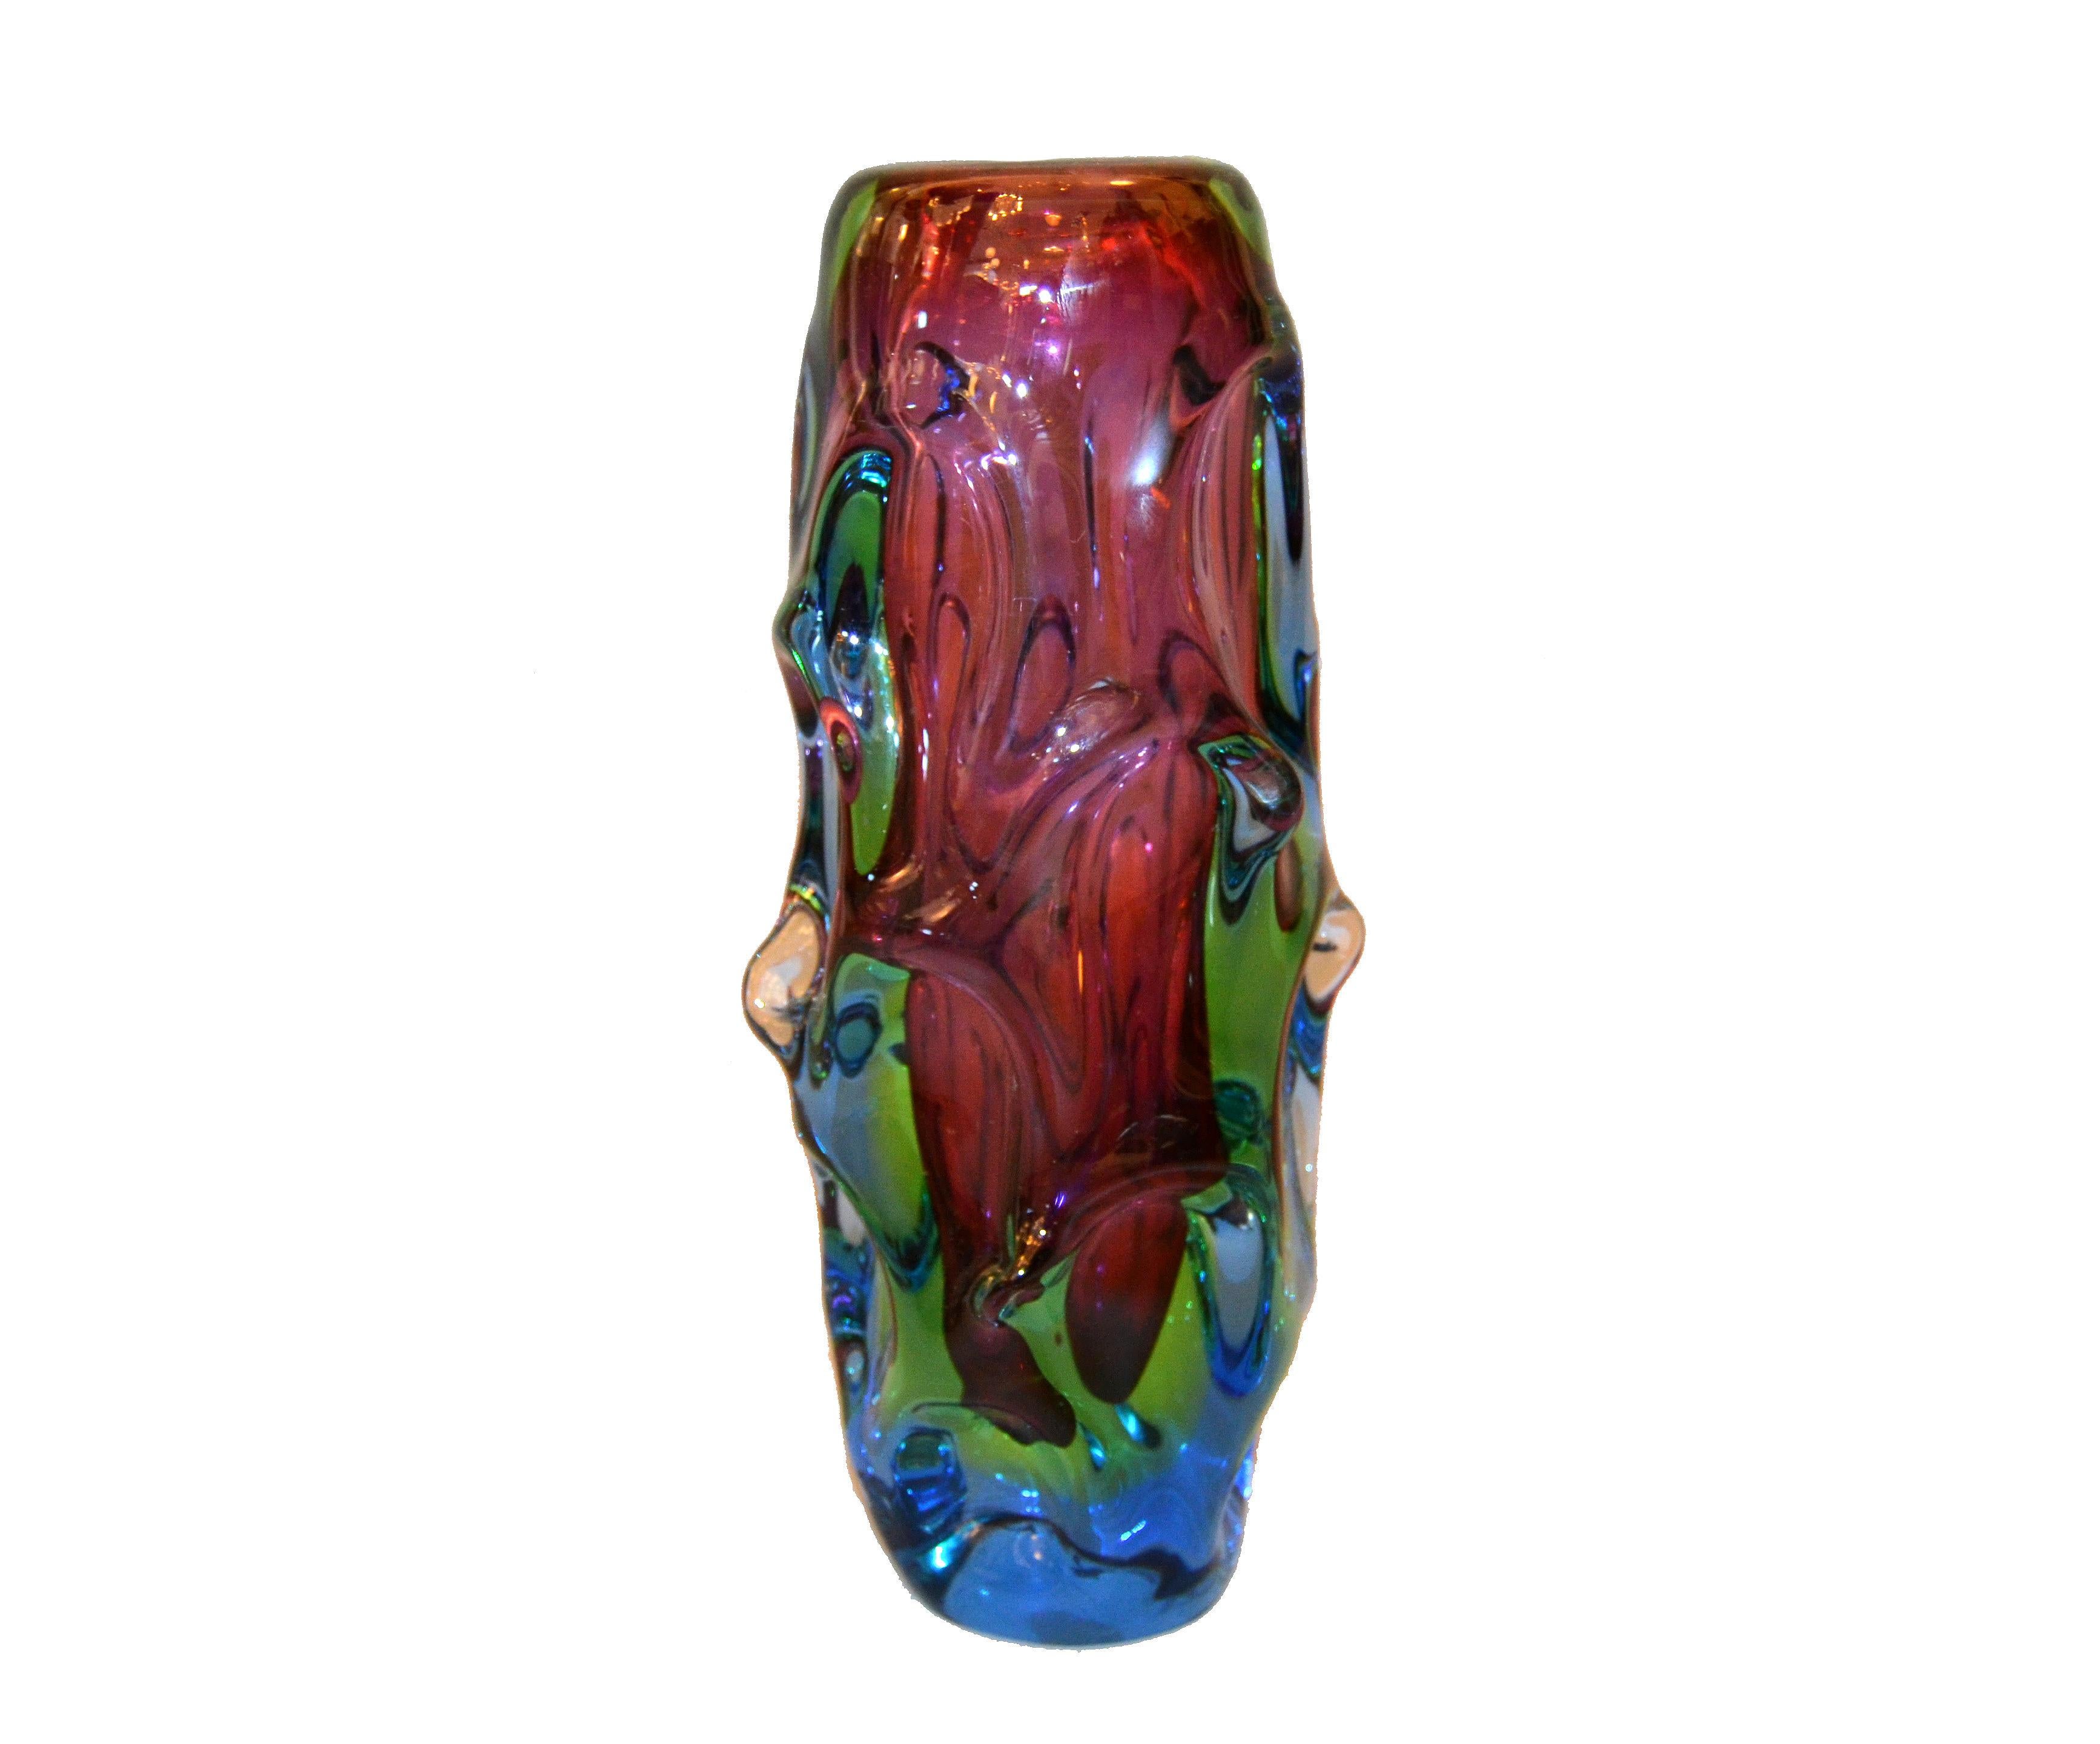 Elegant Italien sculptural hand-blown Murano art glass vase in dark pink, blue, green and clear tone.
The vase is very heavy.
Simply lovely.